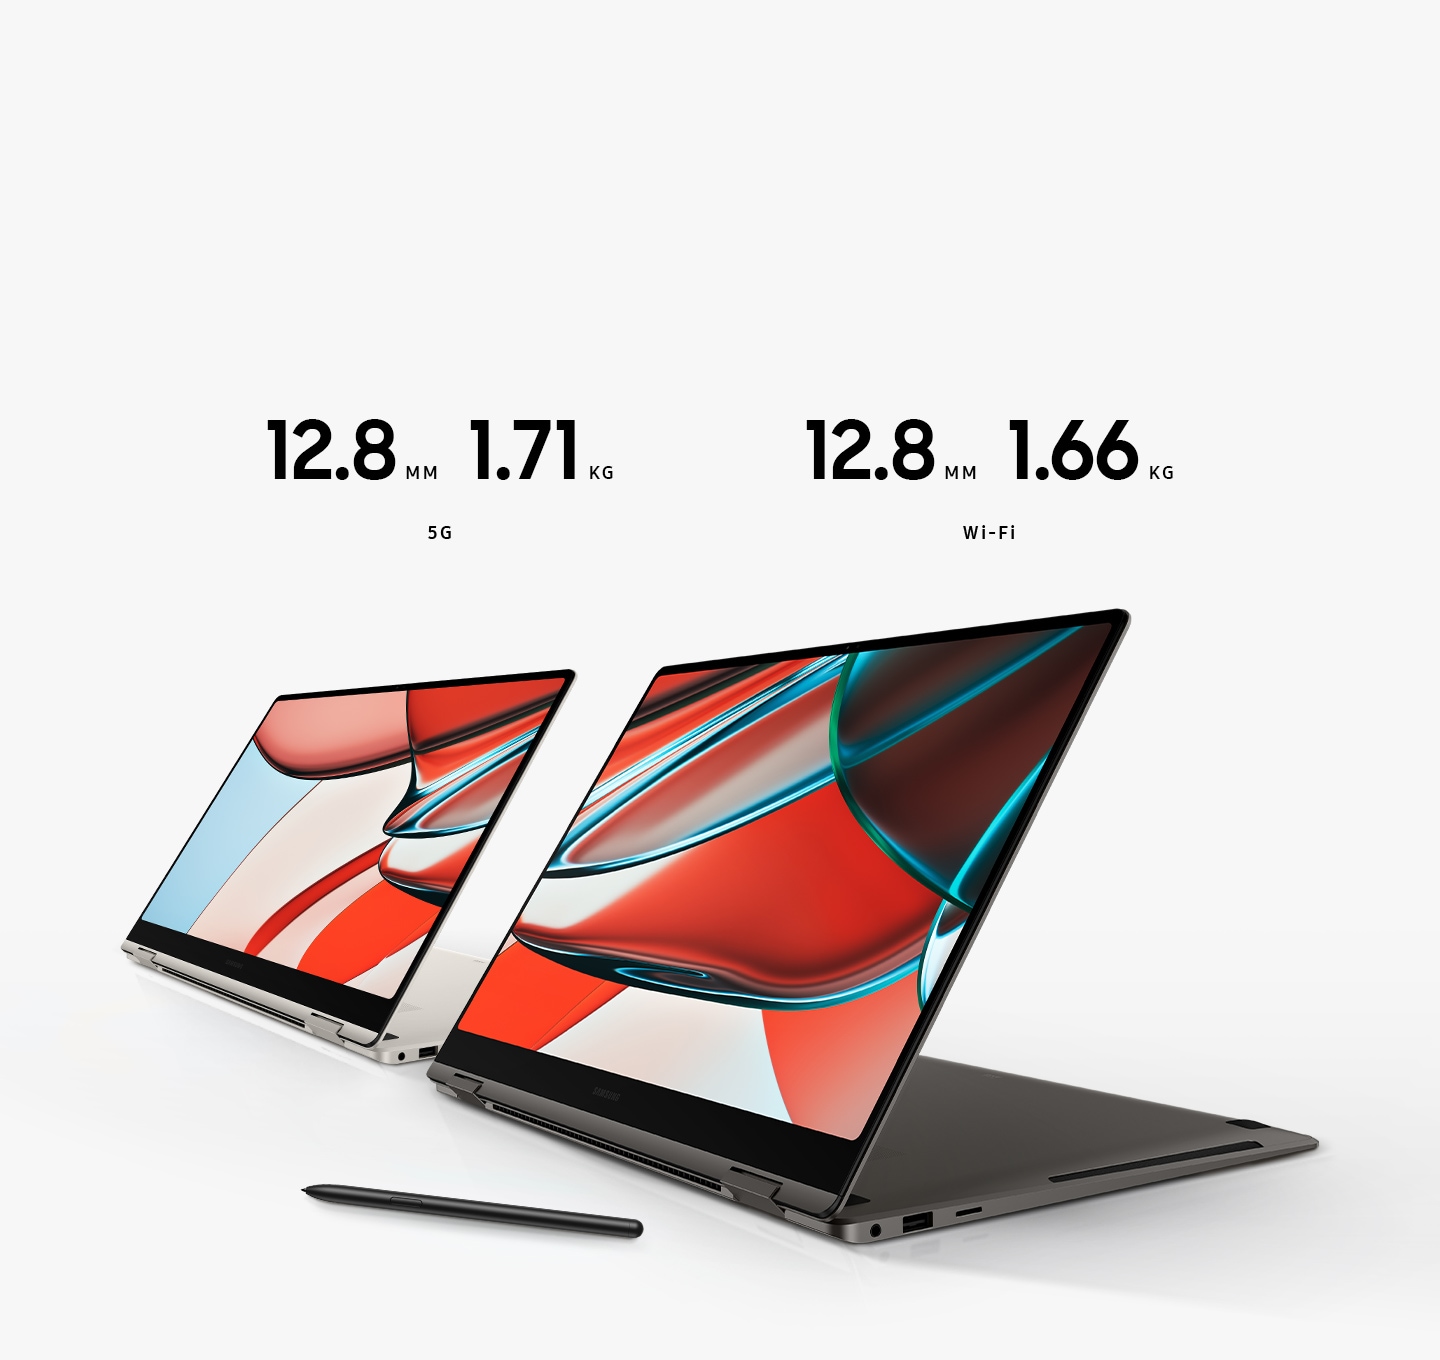 One beige-coloured and one graphite-coloured Galaxy Book3 Pro 360 devices are next to each other. Both are folded slightly back, with red and blue wallpaper onscreen. An S Pen is on the floor. "12.8MM, 1.71KG, 5G"and "12.8MM, 1.66KG, Wi-Fi".